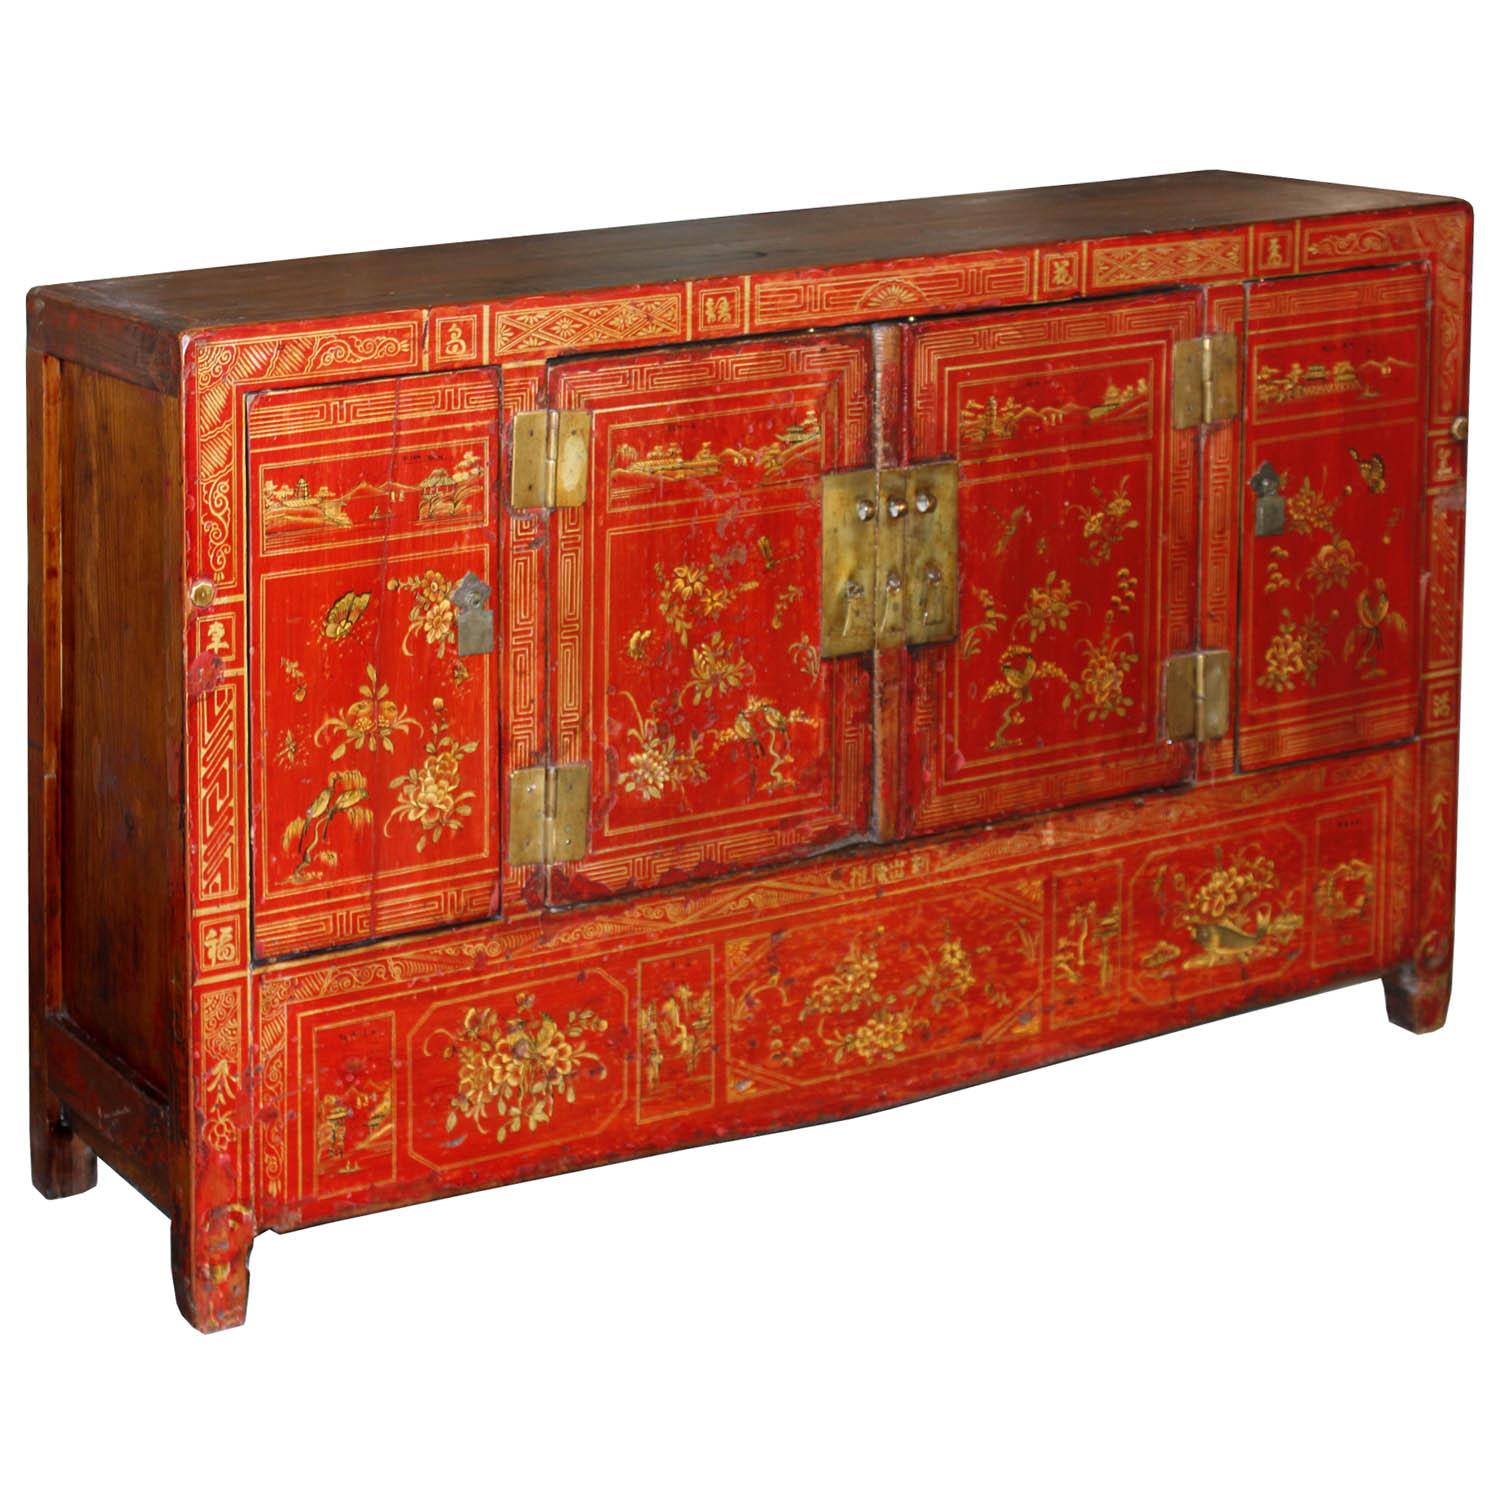 Red lacquer four-door wedding buffet with gold hand-painted designs symbolizing prosperity, happiness and good fortune. New interior shelf and hardware. Made in Dongbei, China, circa 1890. Some wear.